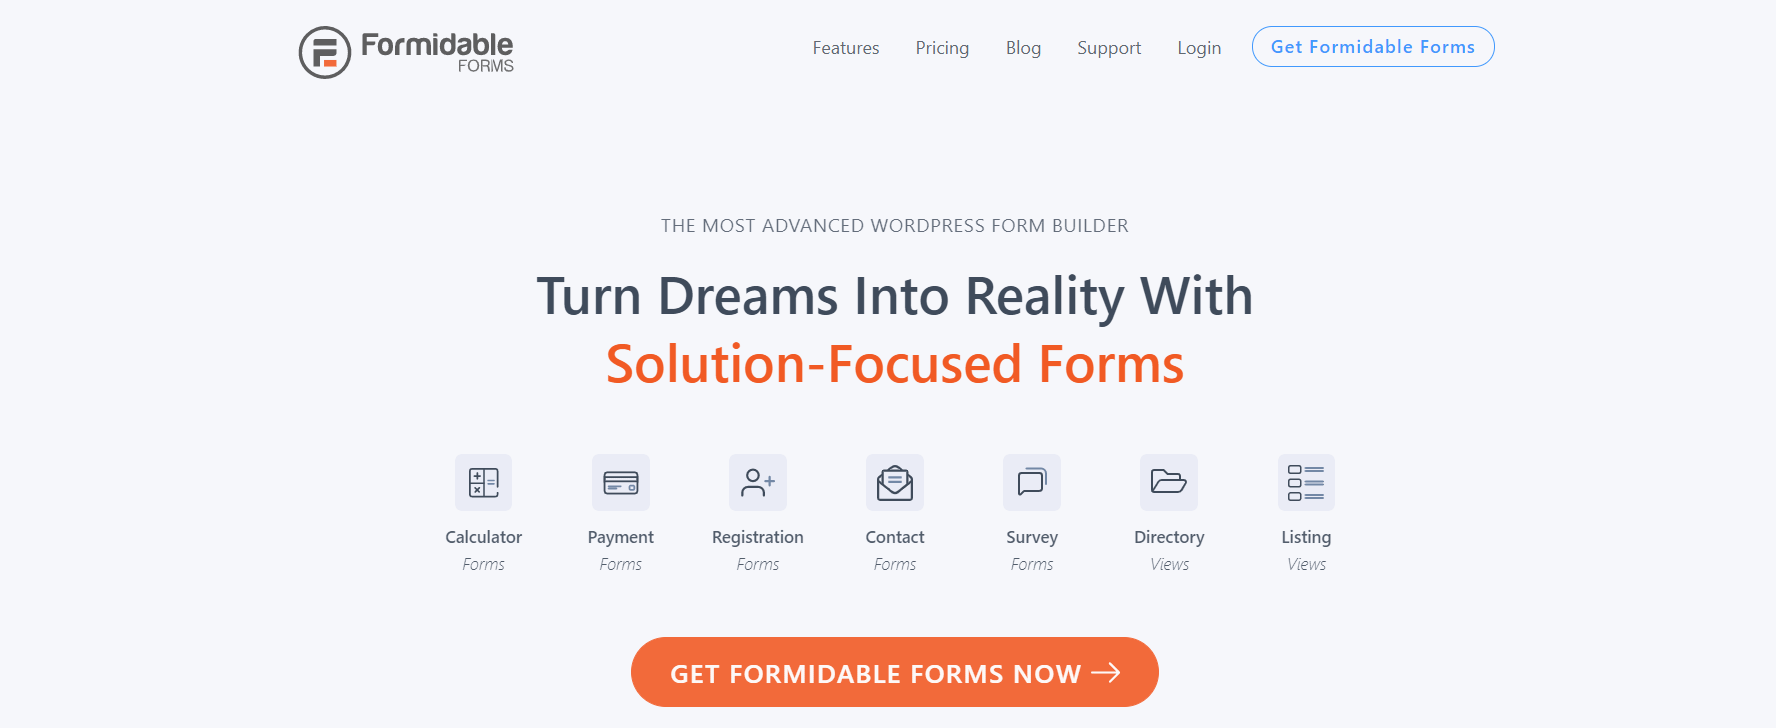 Formidable Form plugin is a great Google Forms alternative for WordPress users